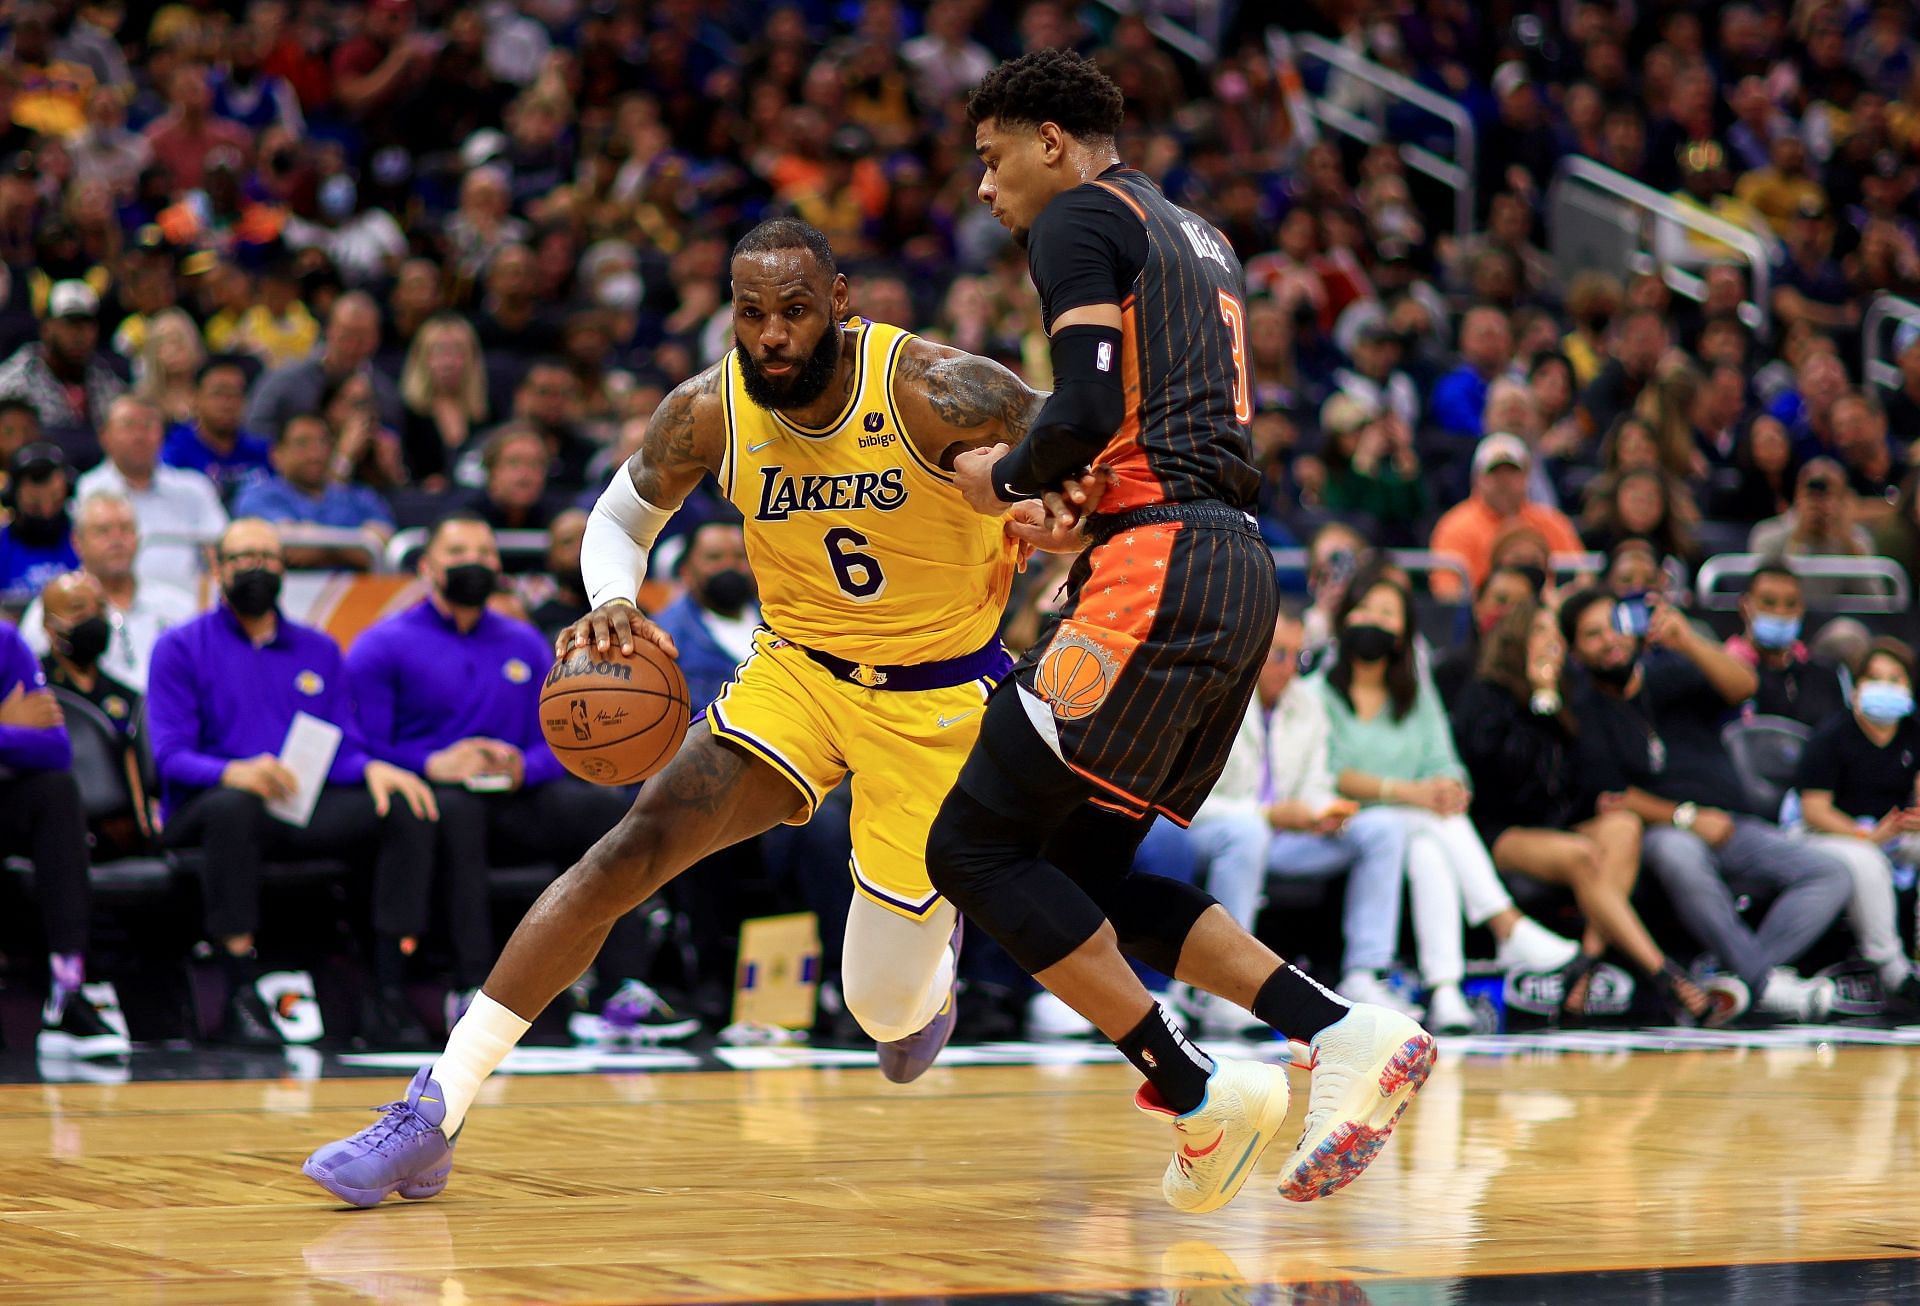 LeBron James of the LA Lakers drives to the basket during a game against the Orlando Magic.